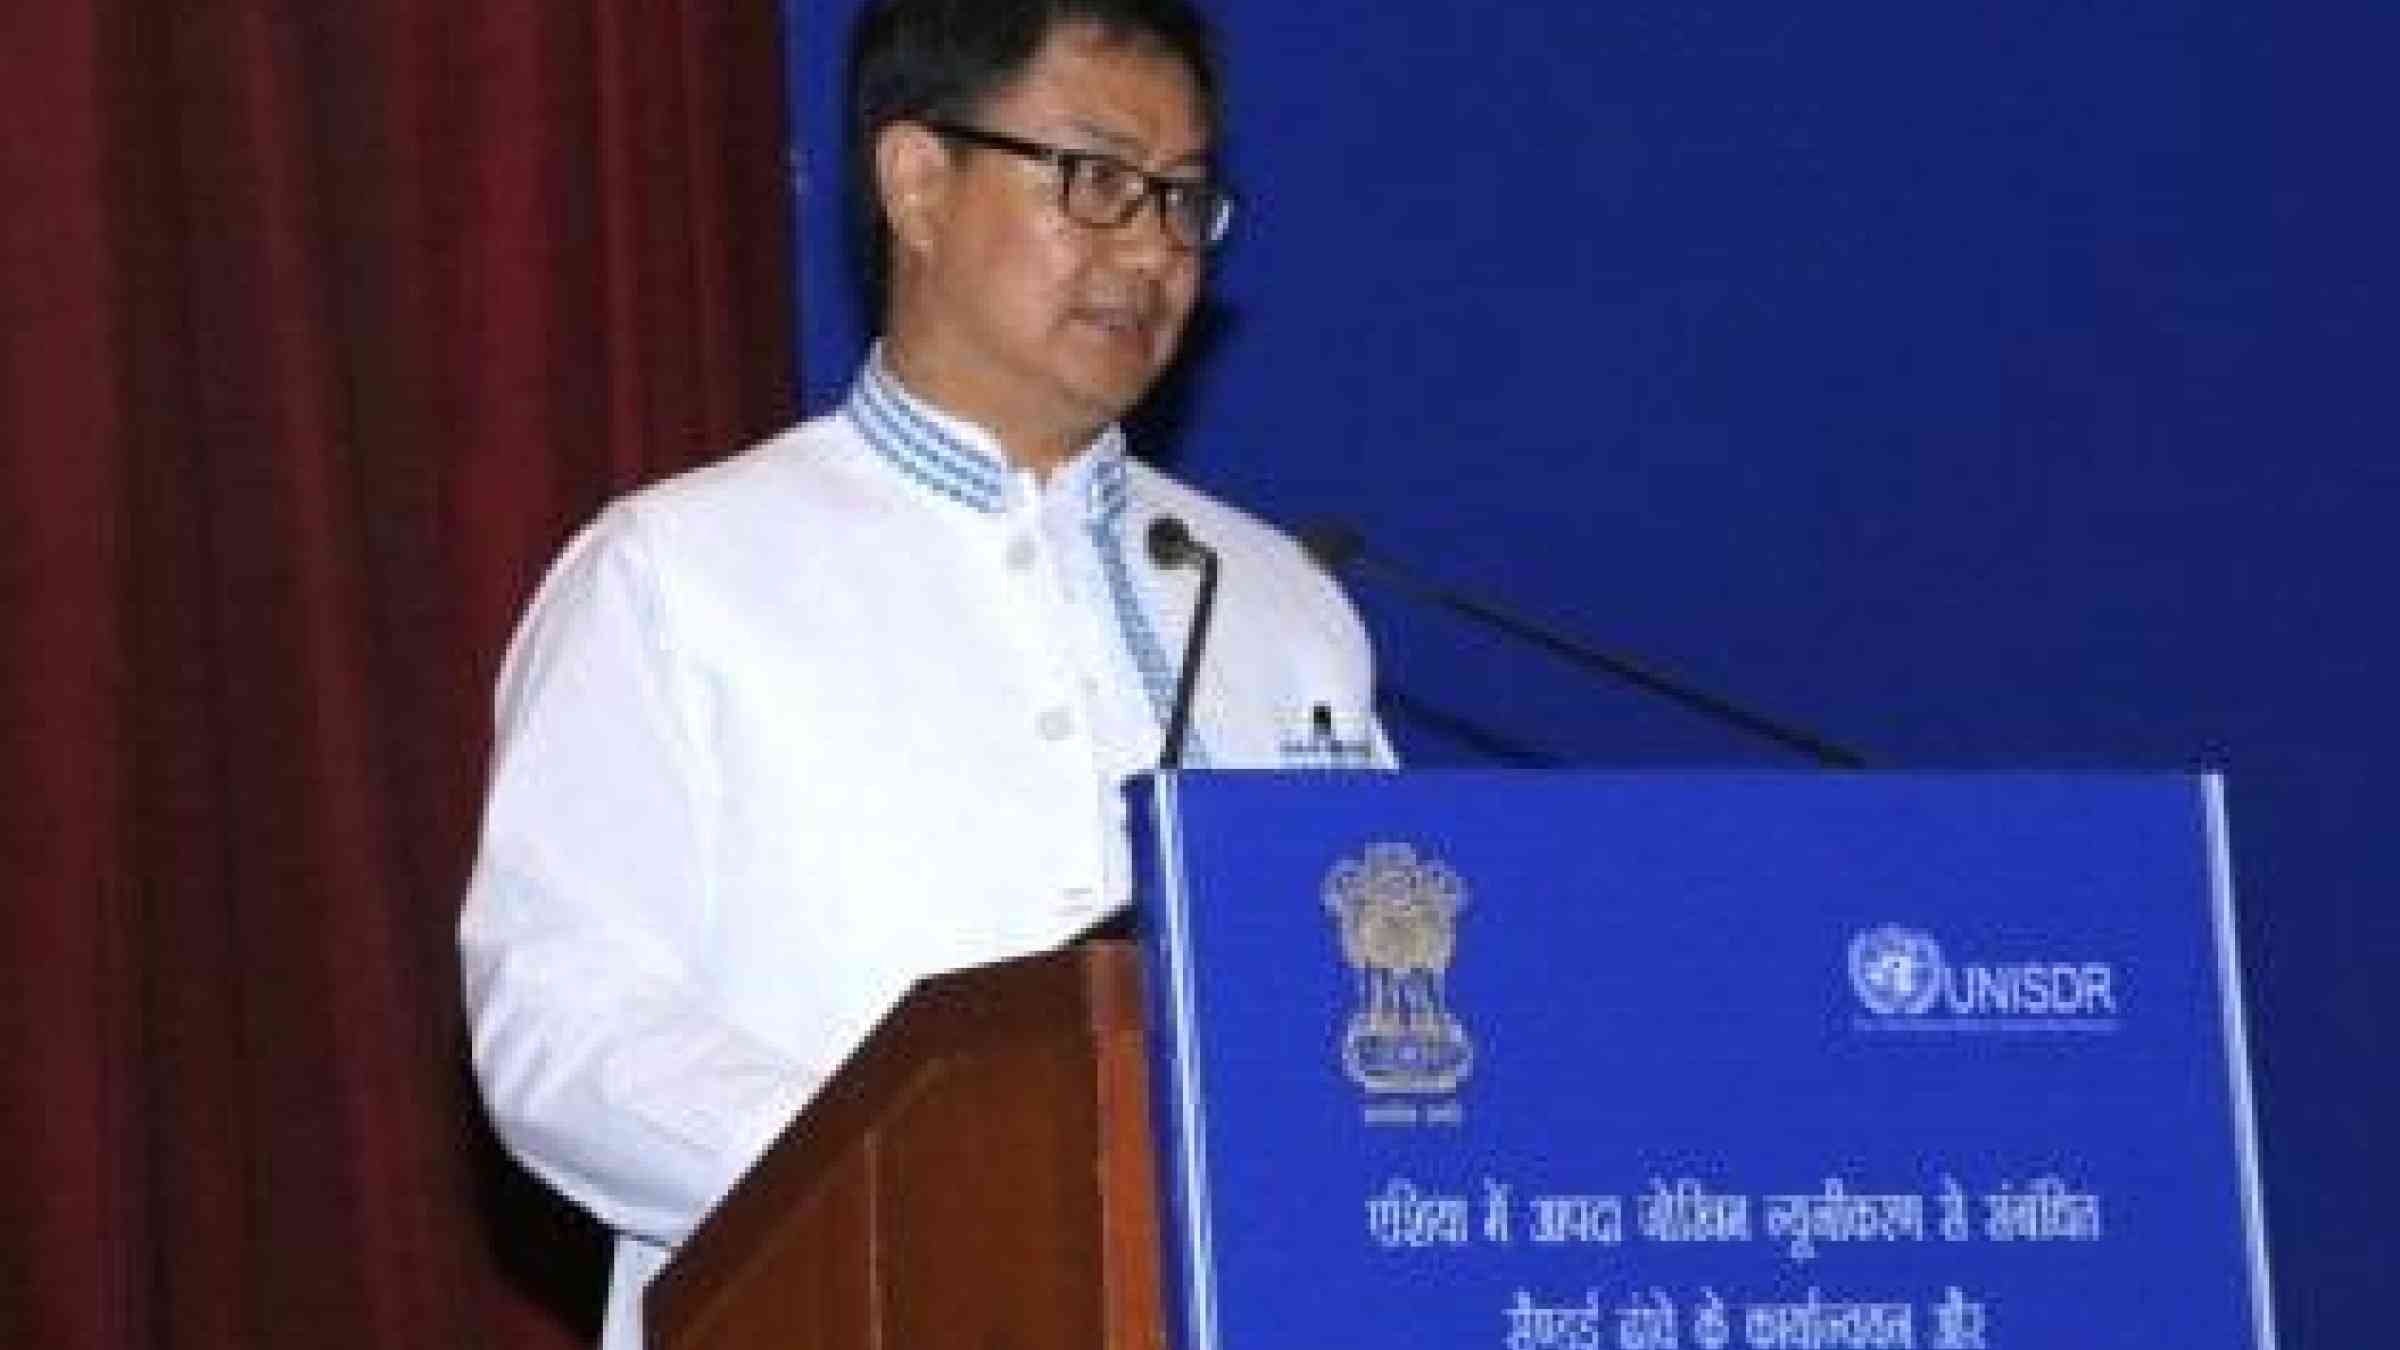 Mr. Kiren Rijiju, India's Minister of State for Home Affairs and UNISDR Champion